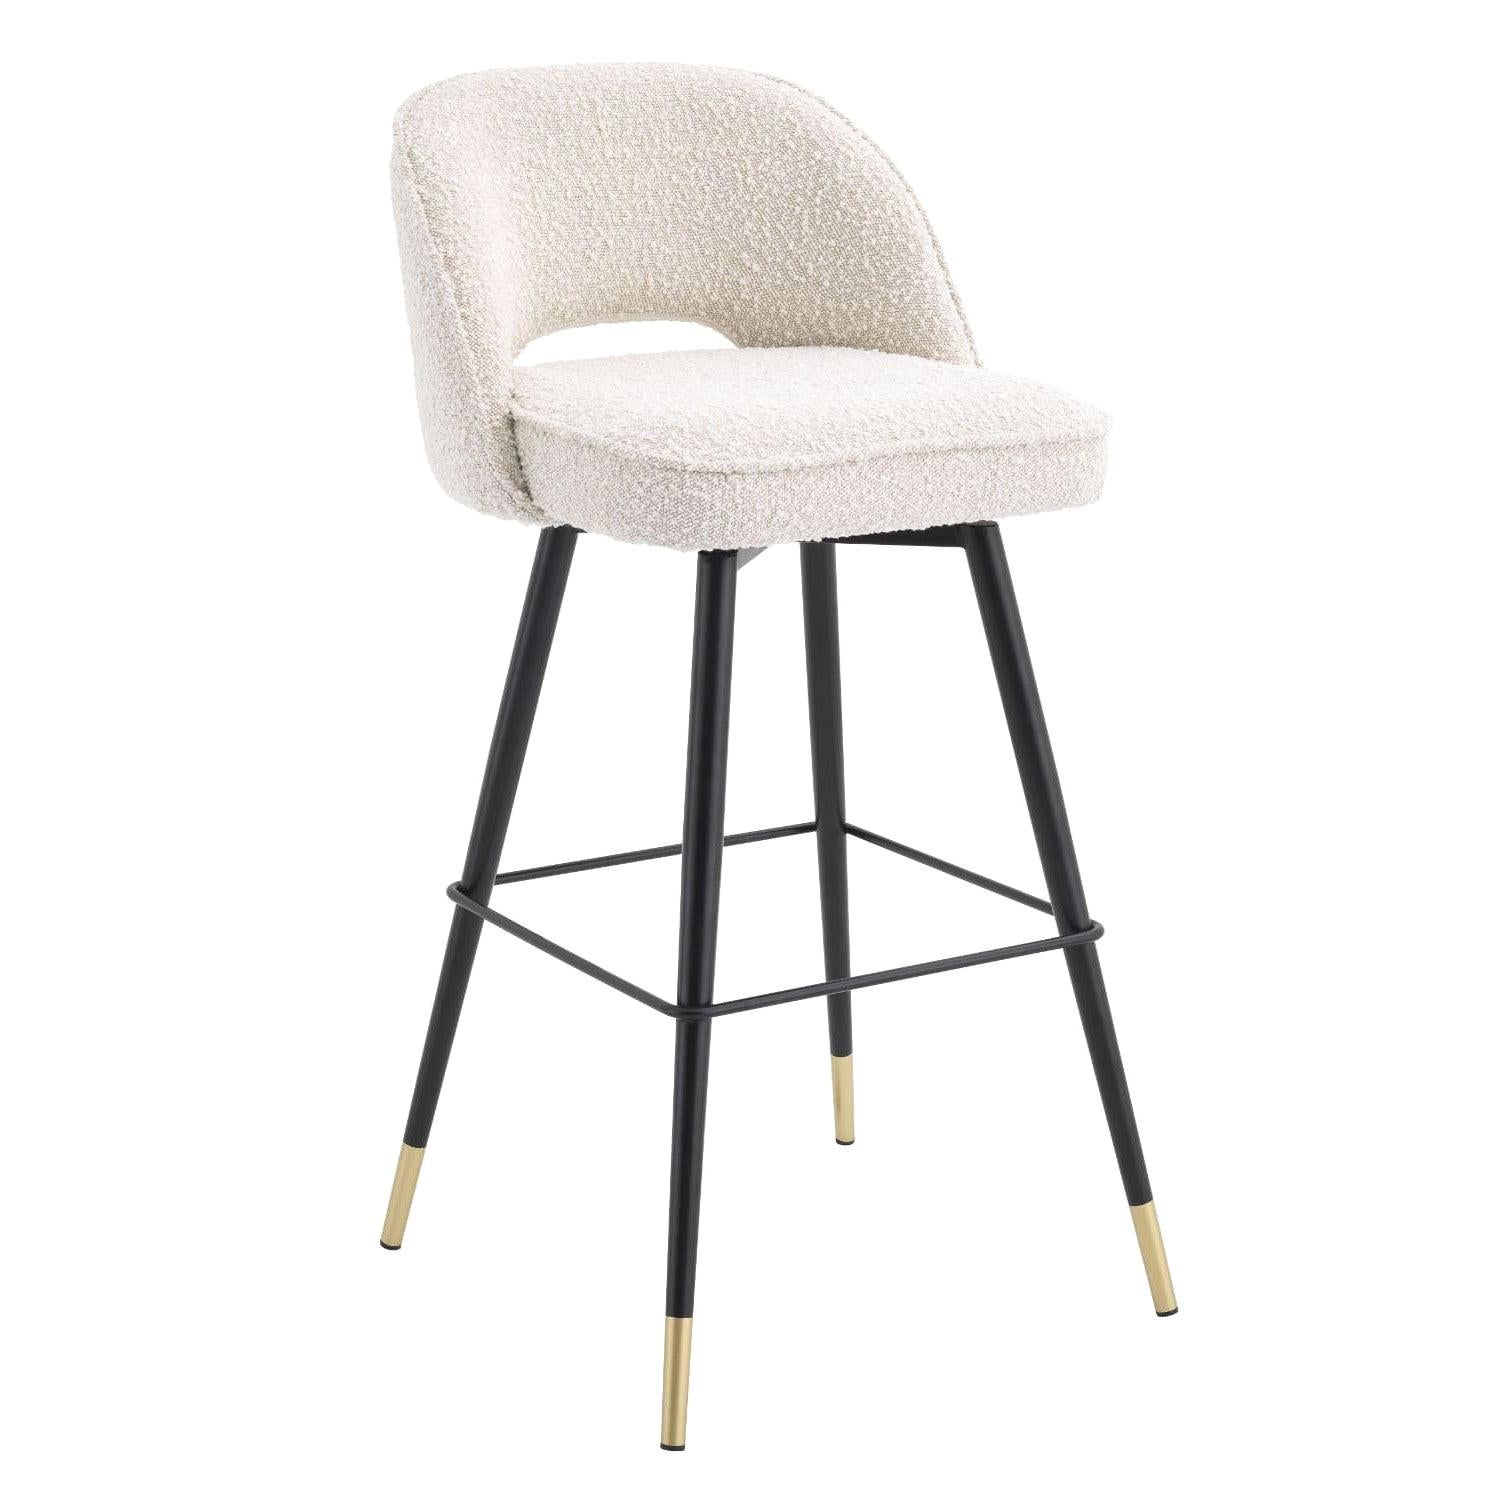 Counter Swivel Bar Stool In Bouclé, Fabric Swivel Bar Stools With Back Supports